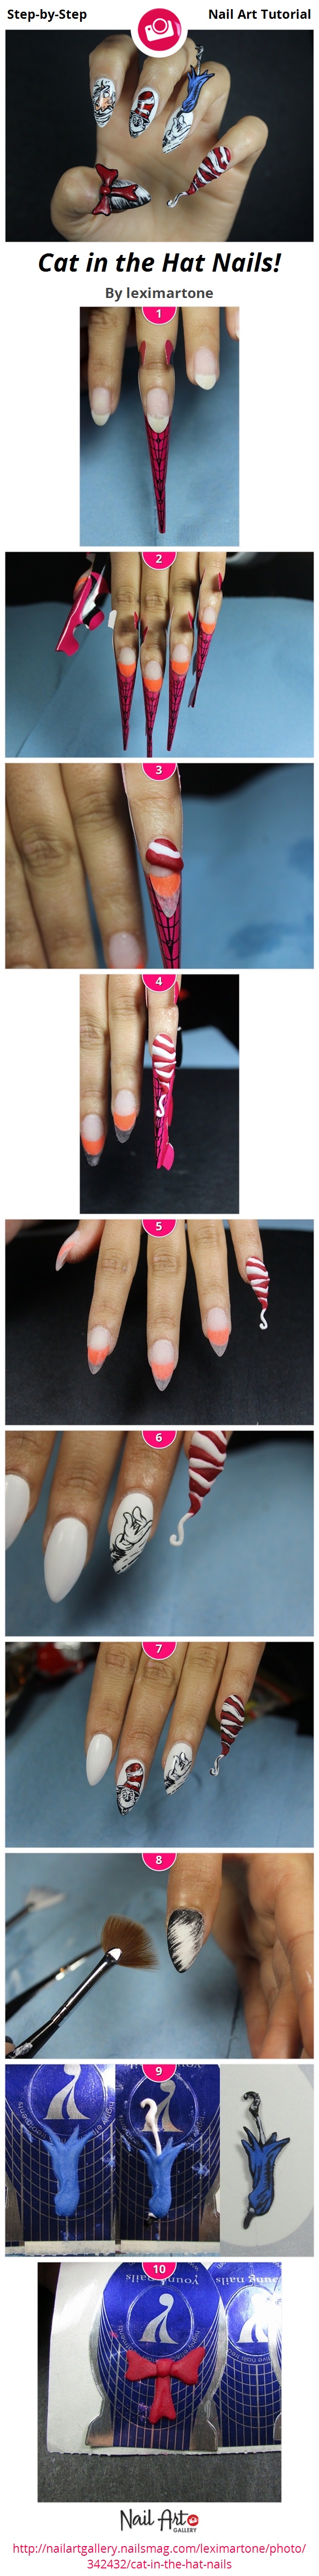 Cat in the Hat Nails! - Nail Art Gallery